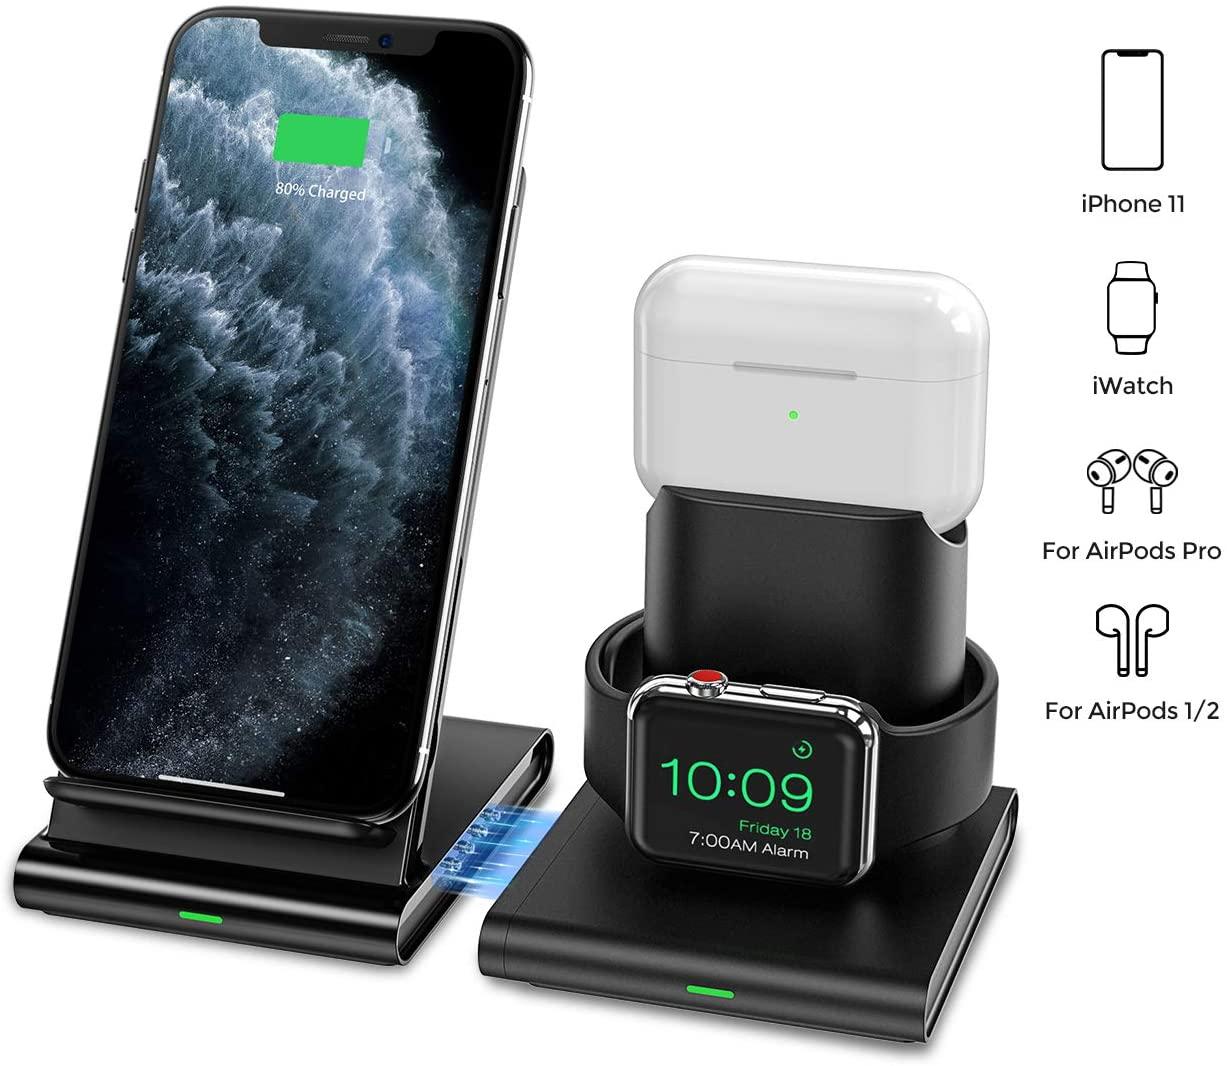 iPhone and Apple Watch and AirPods Seneo Wireless Charger for $19.98